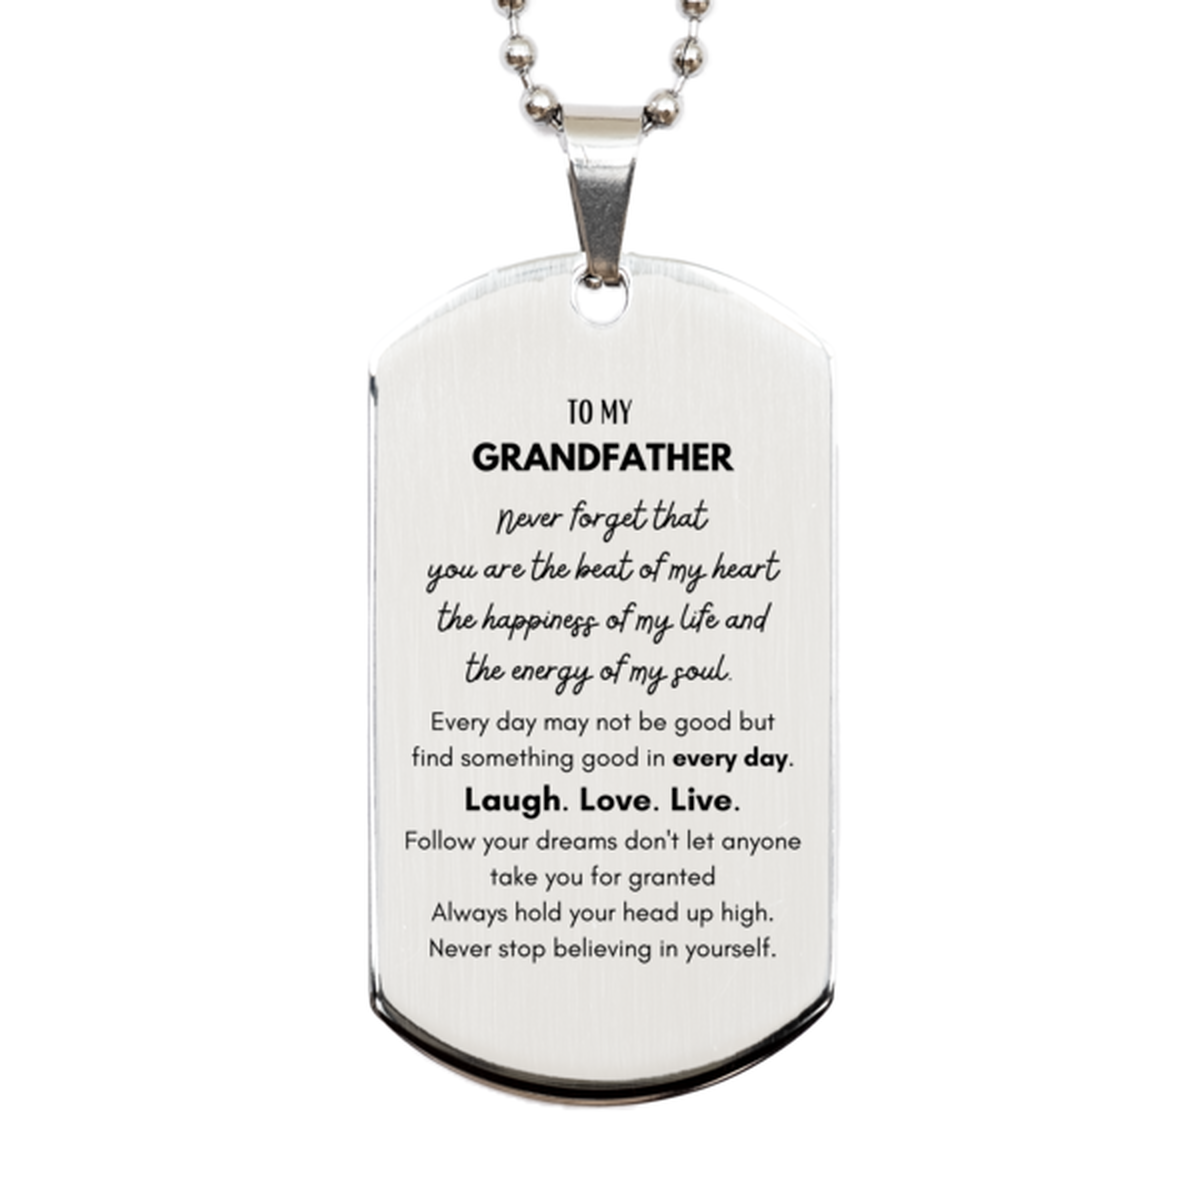 To My Grandfather Dogtag Gifts, Christmas Grandfather Silver Dog Tag Present, Birthday Unique Motivational For Grandfather, To My Grandfather Never forget that you are the beat of my heart the happiness of my life and the energy of my soul